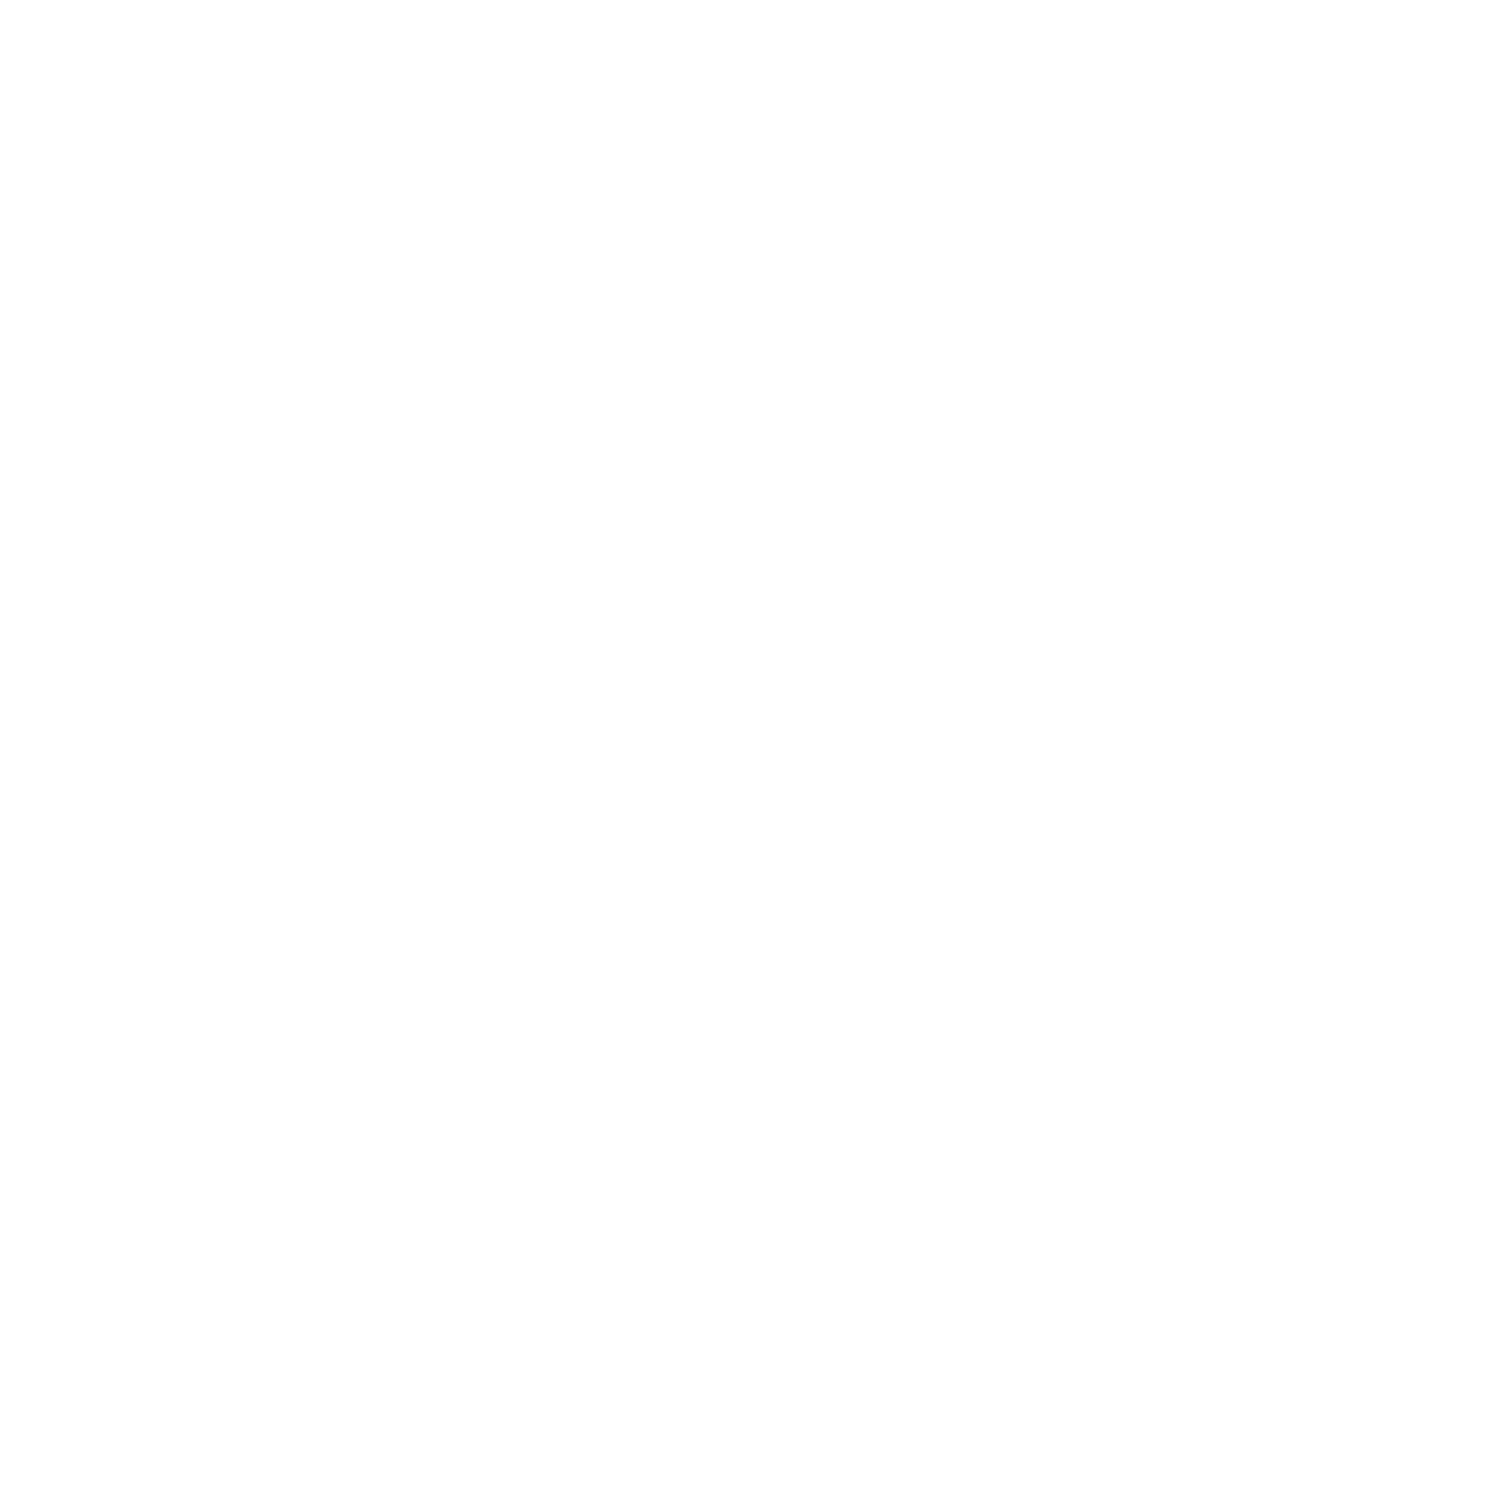 Willow Leaf Counselling